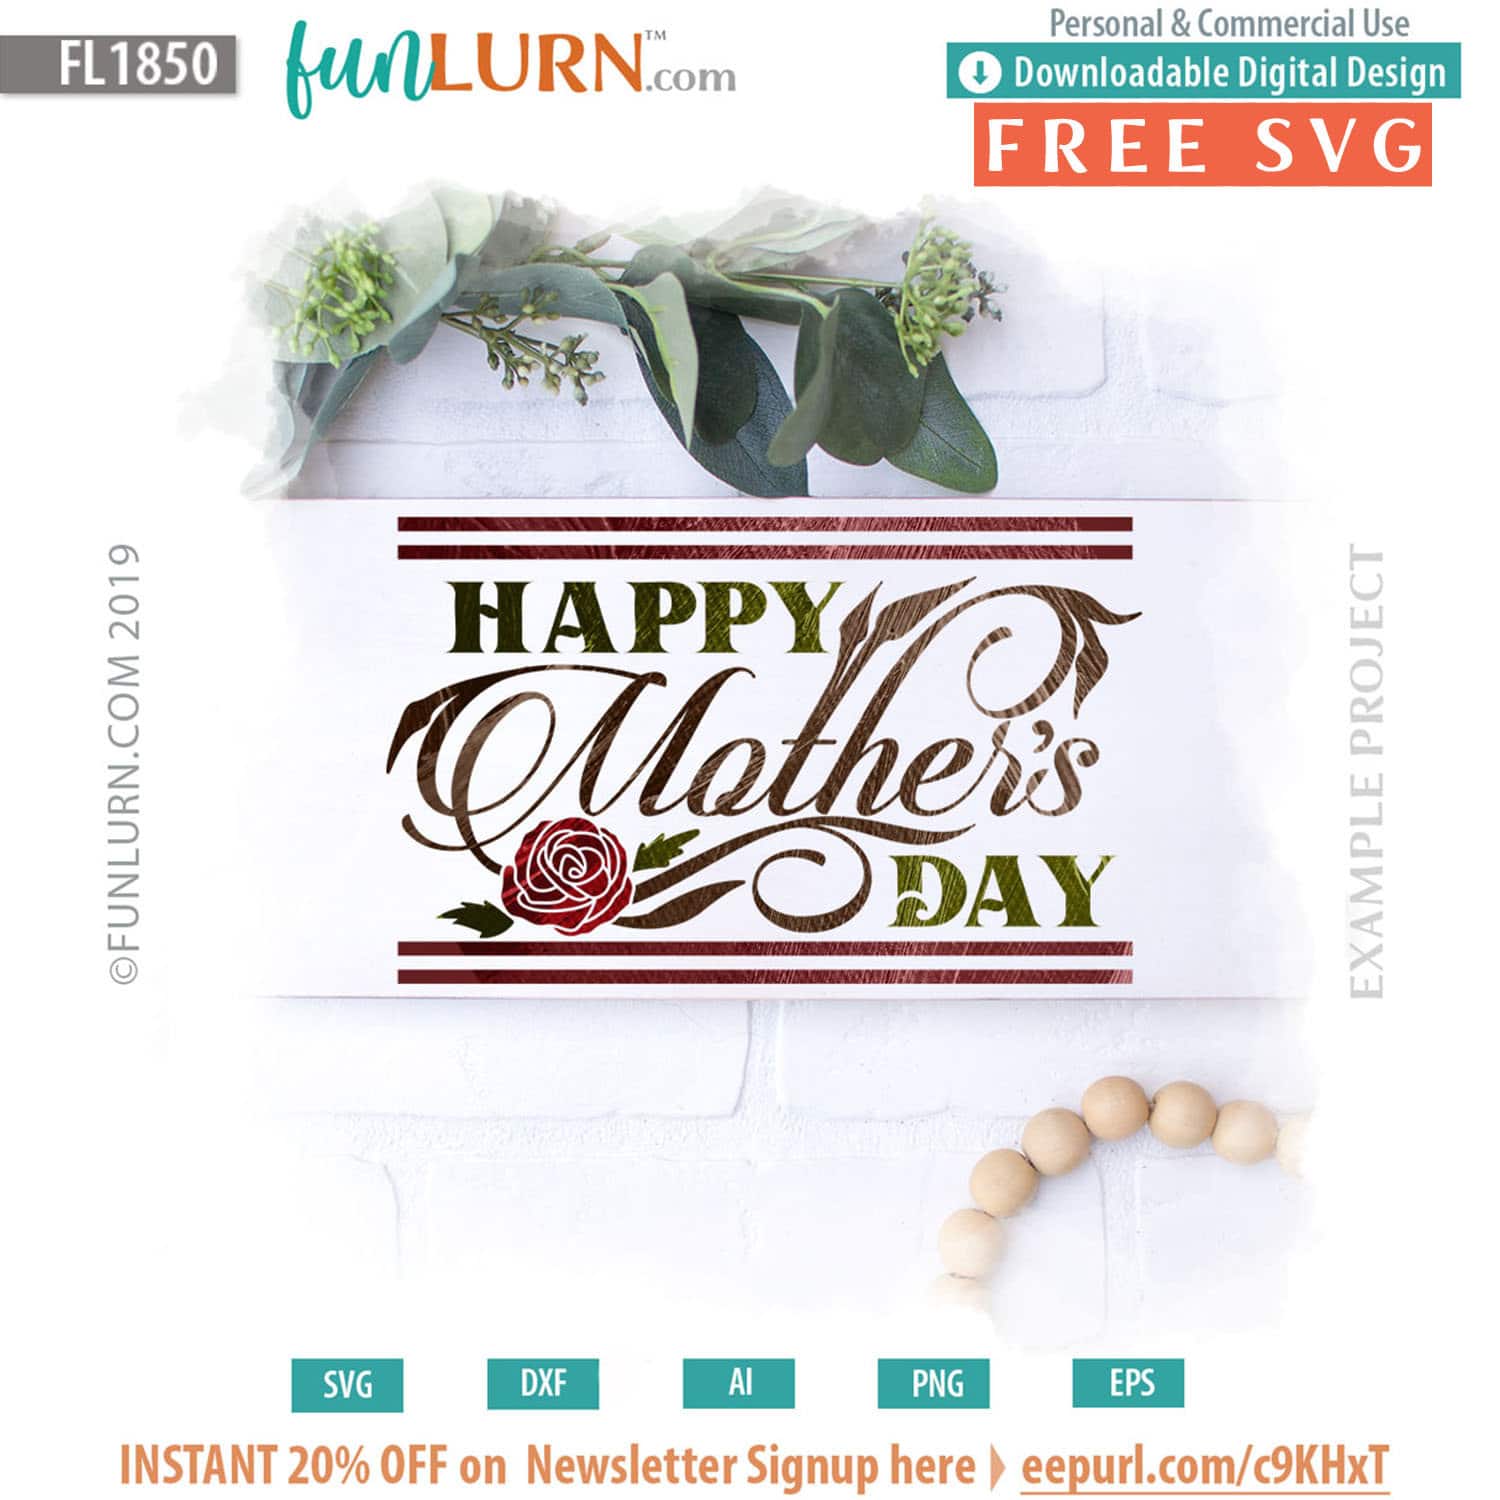 Download Happy Mother's Day svg - FunLurn